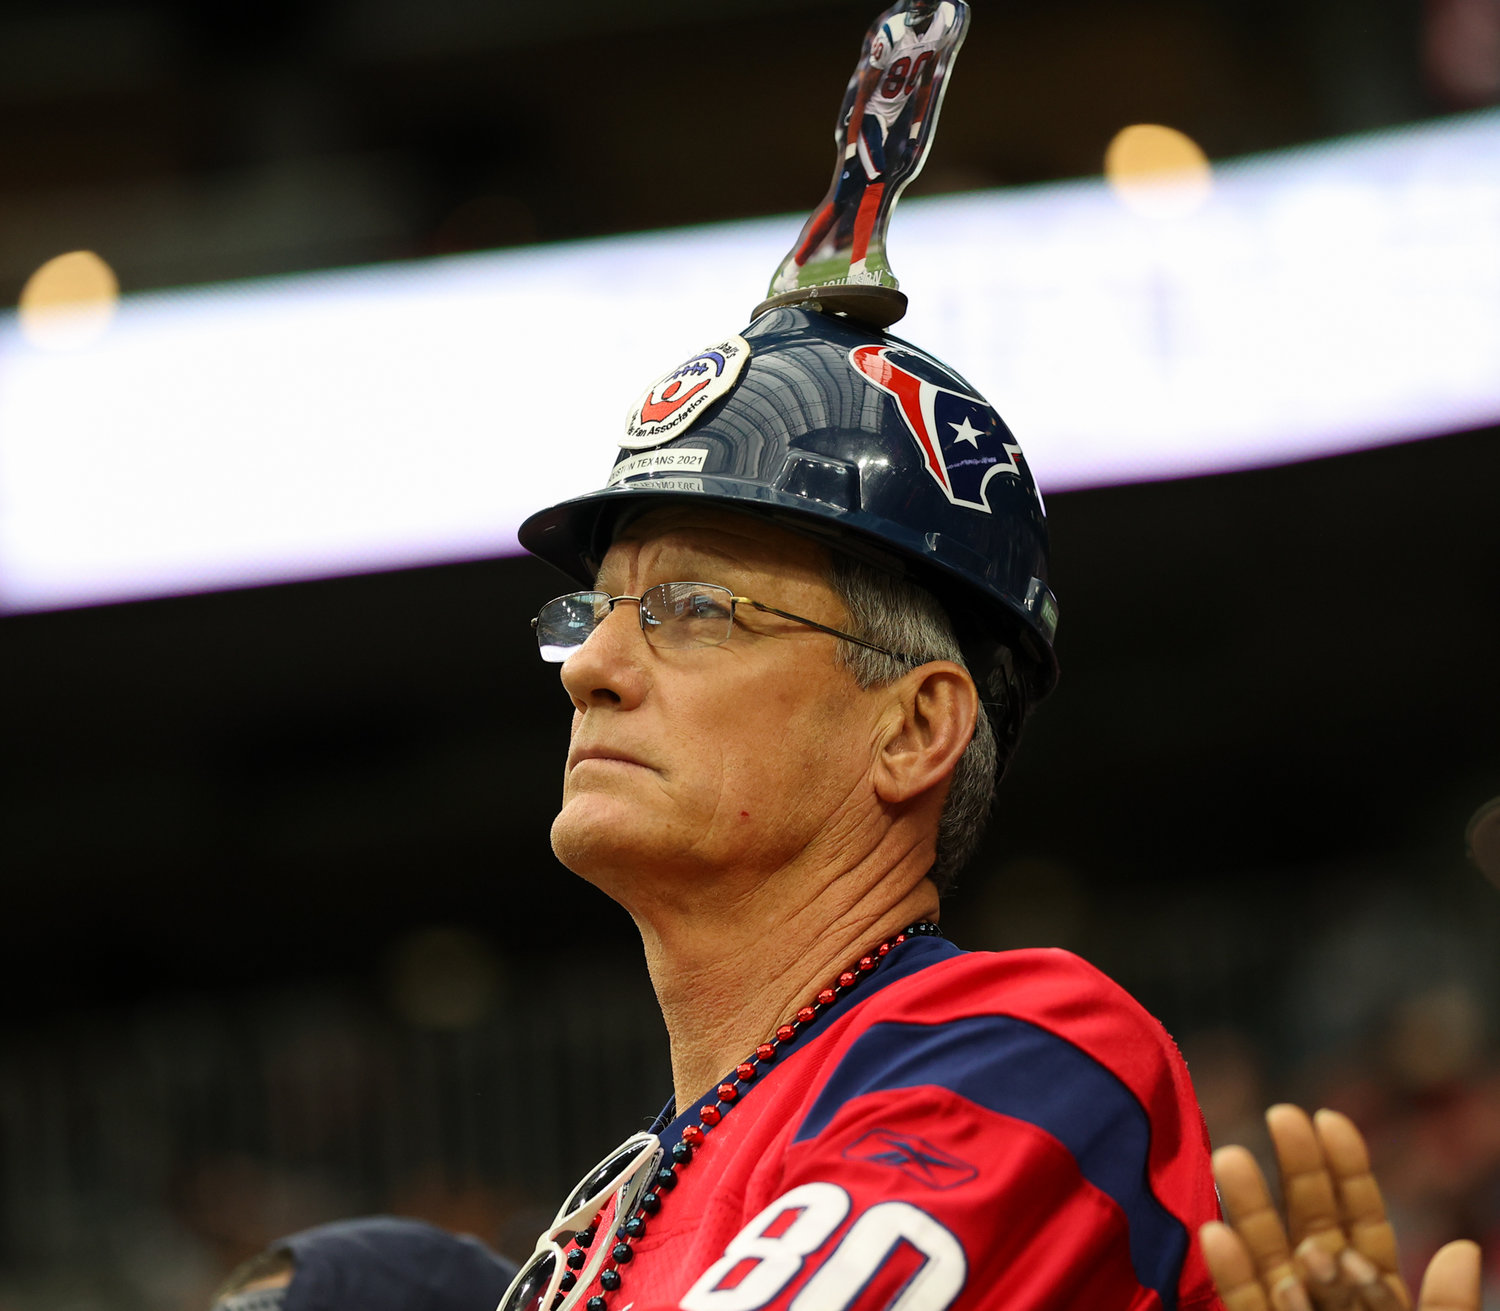 A Houston Texans fan during an NFL game between the Texans and the Titans on Jan. 9, 2022 in Houston, Texas. The Titans won, 28-25.